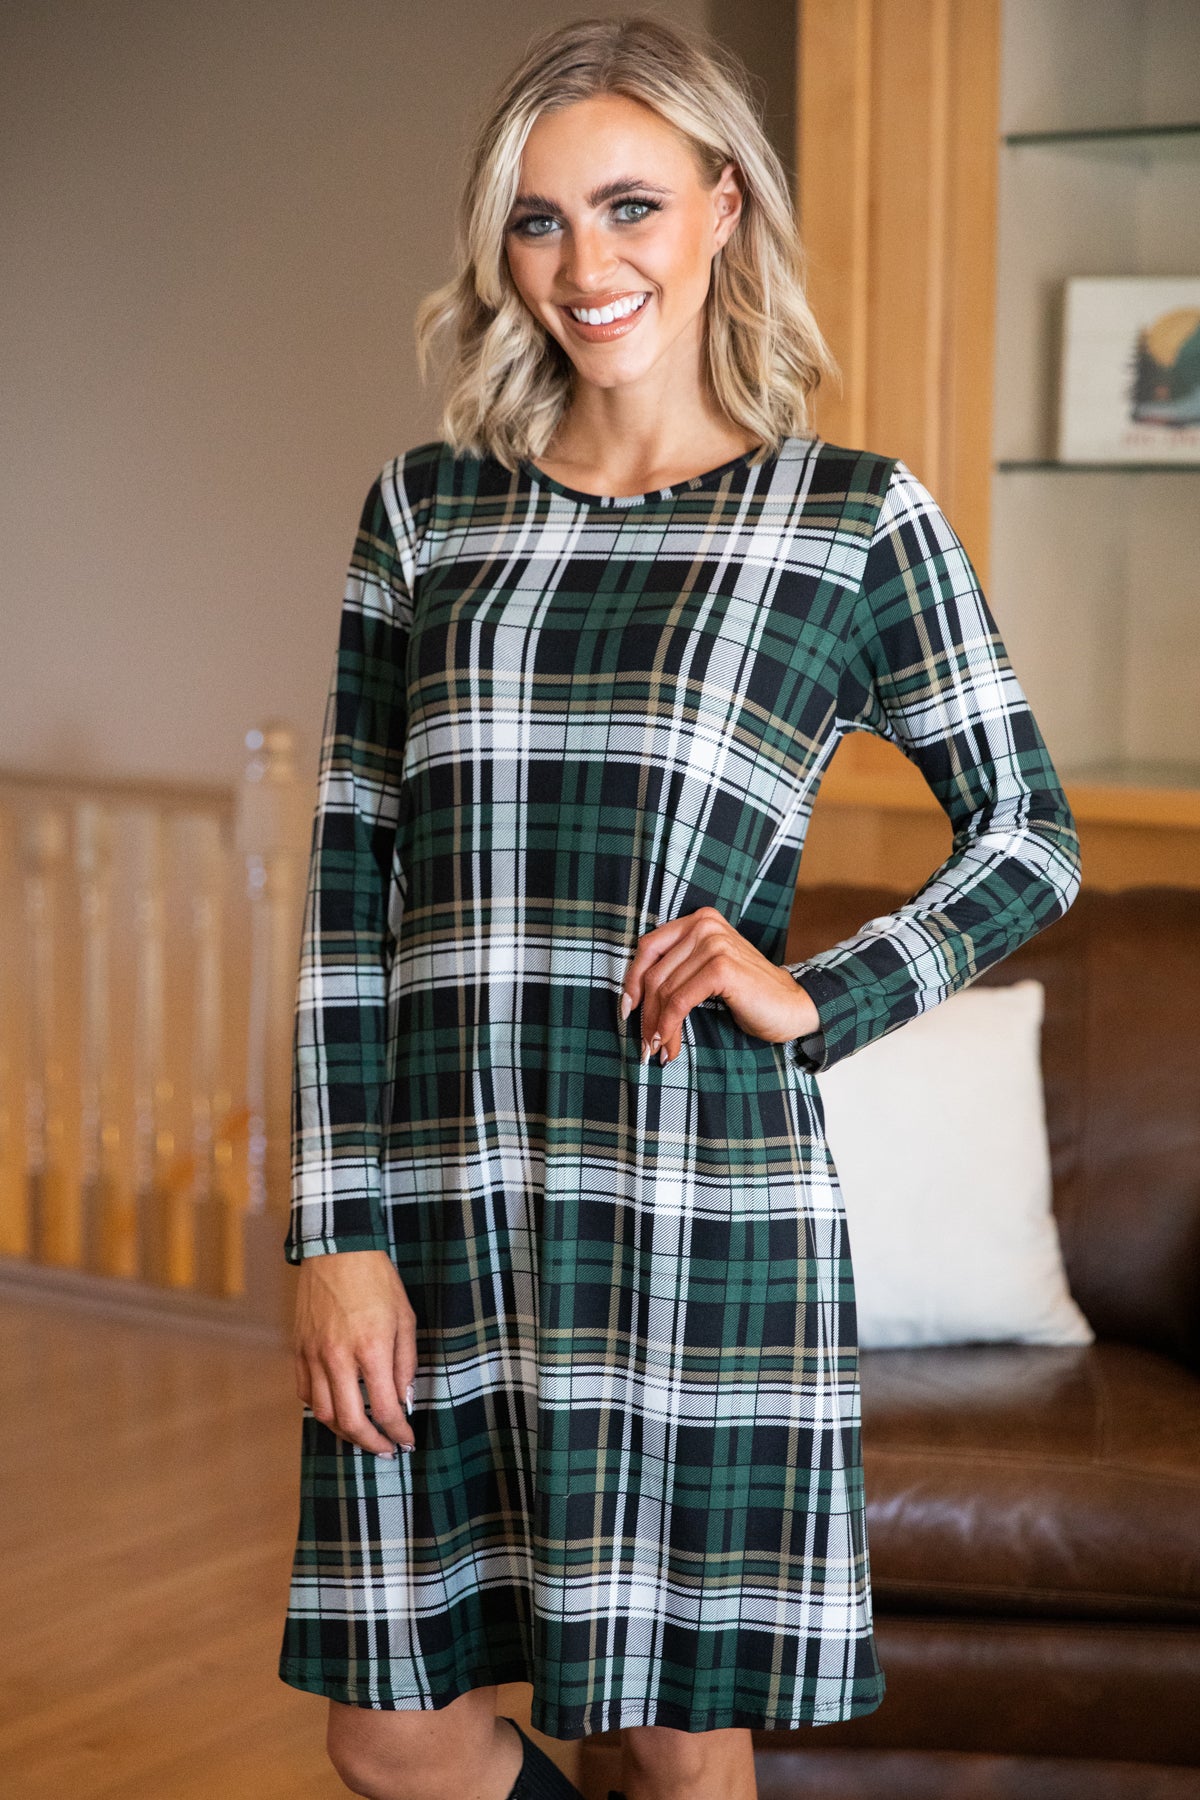 Hunter Green and Black Plaid Dress - Filly Flair